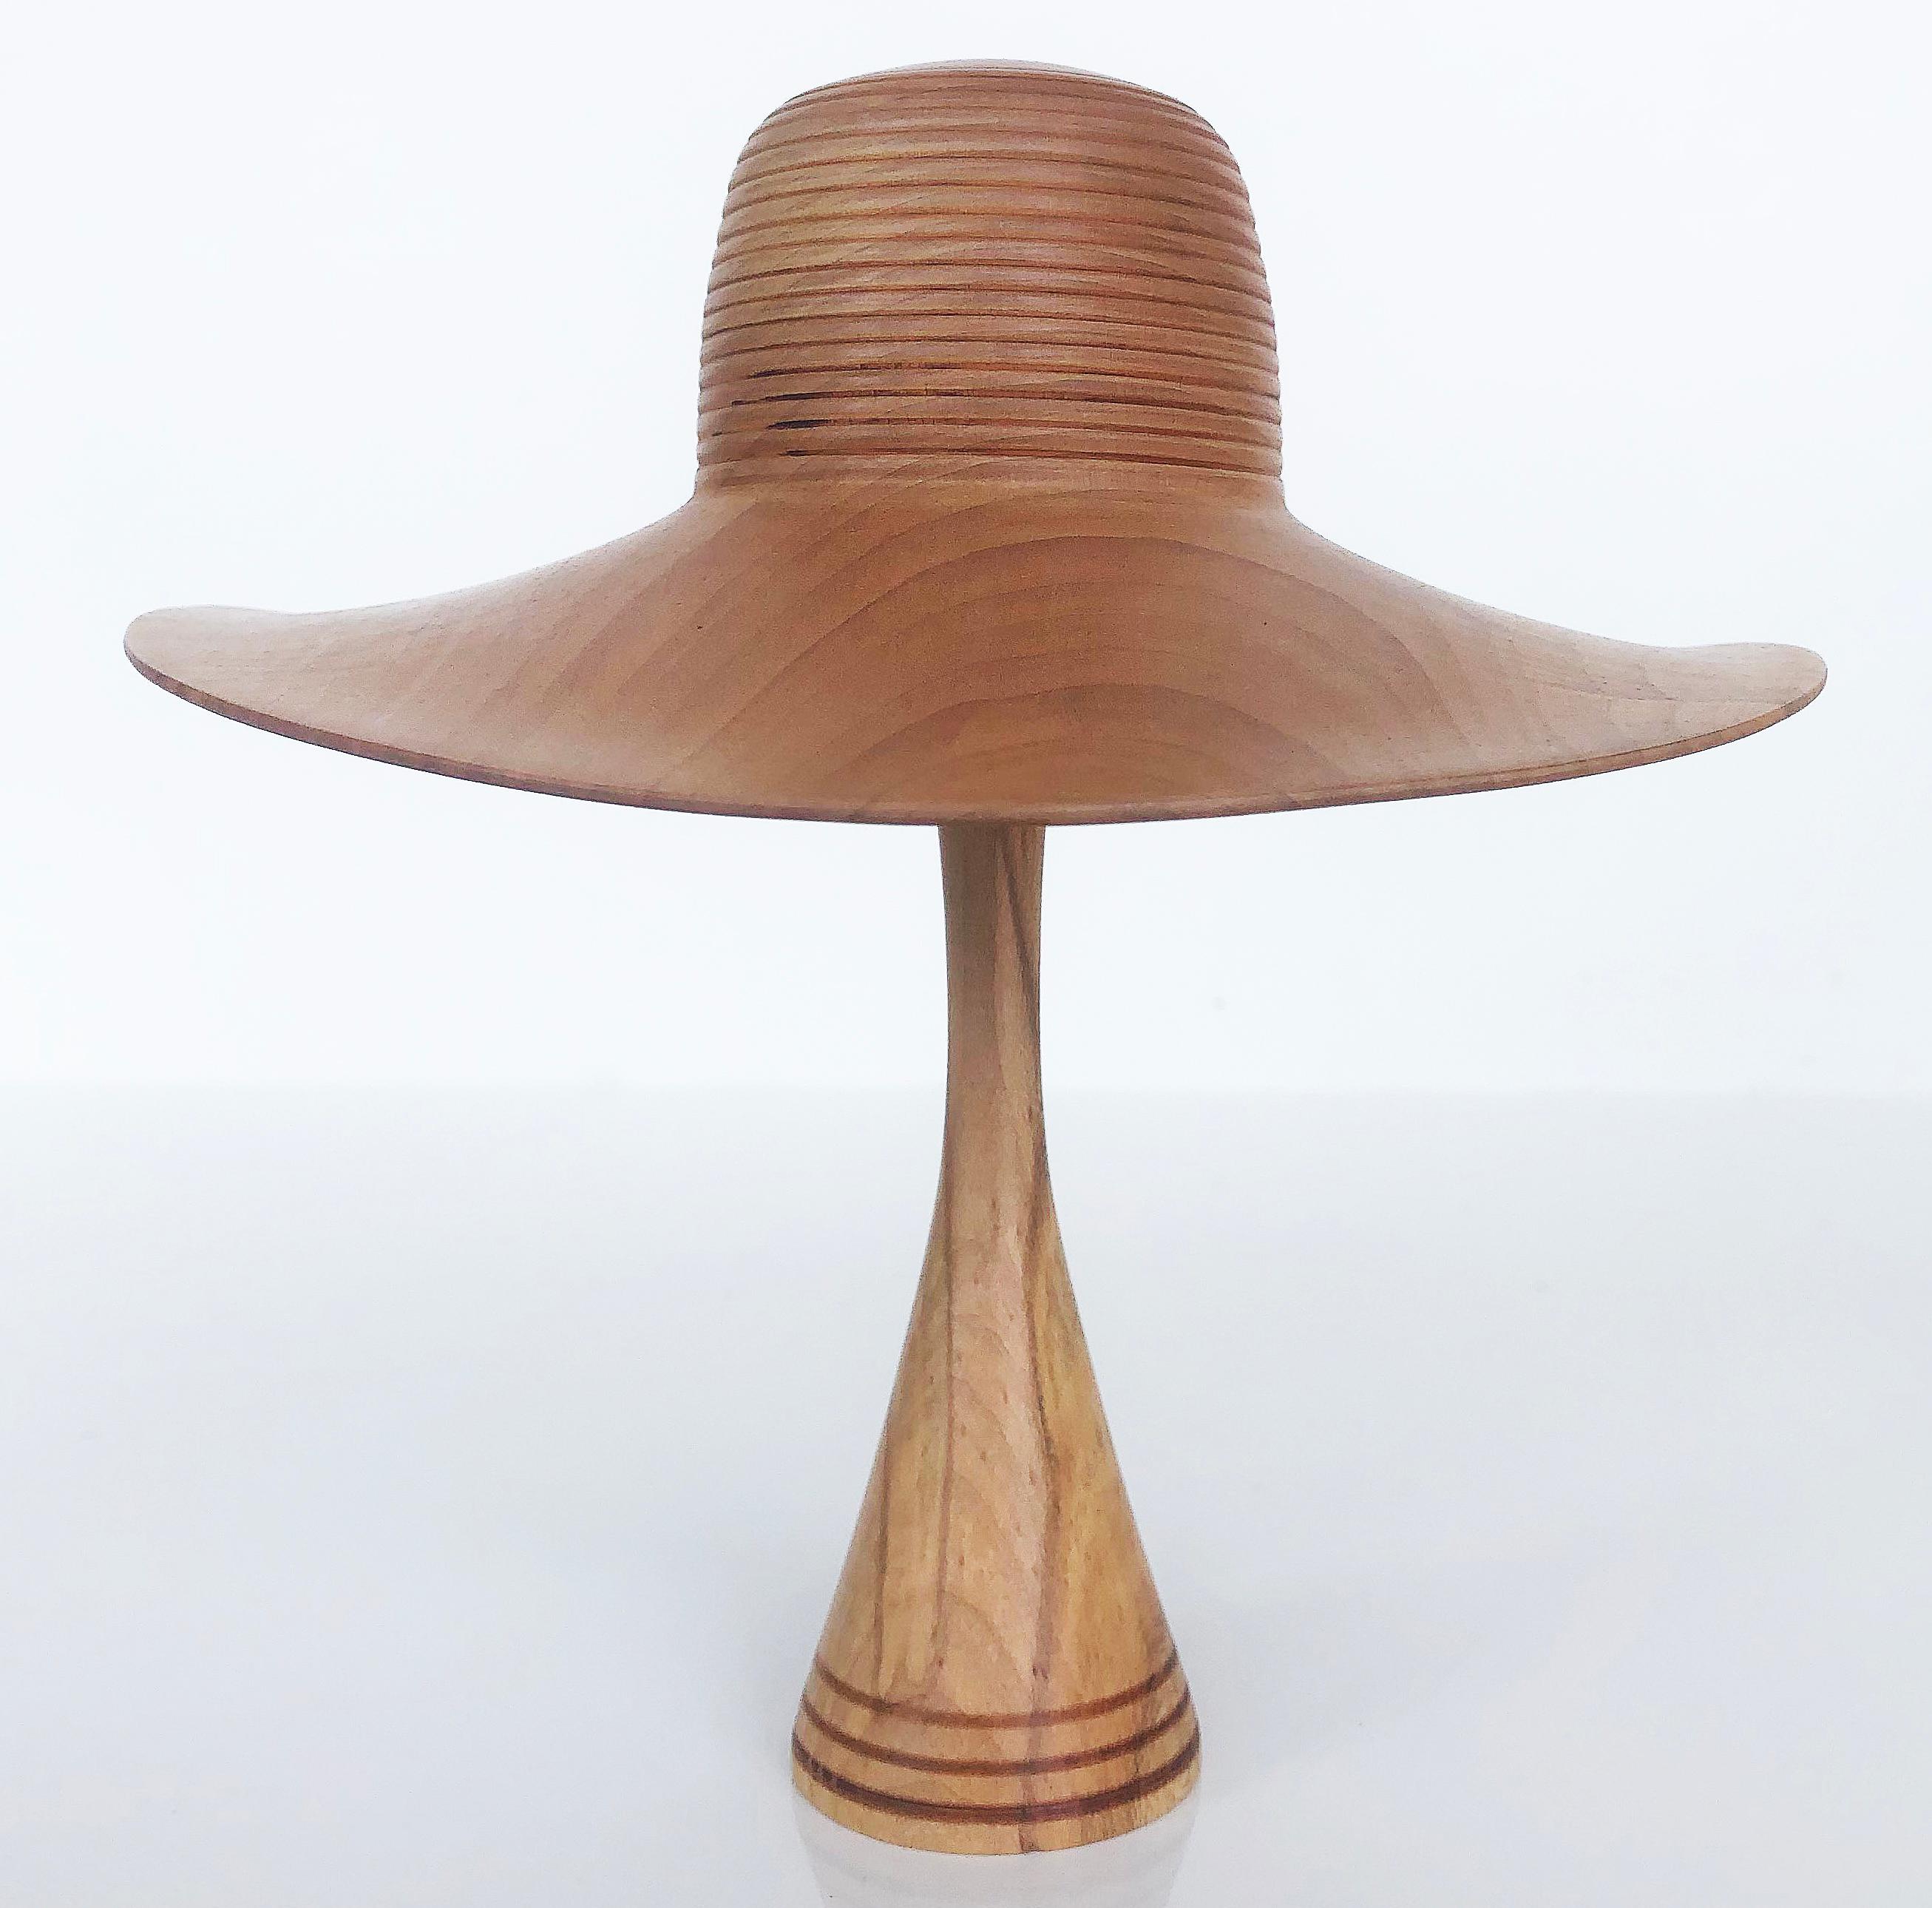  Johannes Michelsen Turned Pair of Wood Hats on Stands, Signed and Dated 3